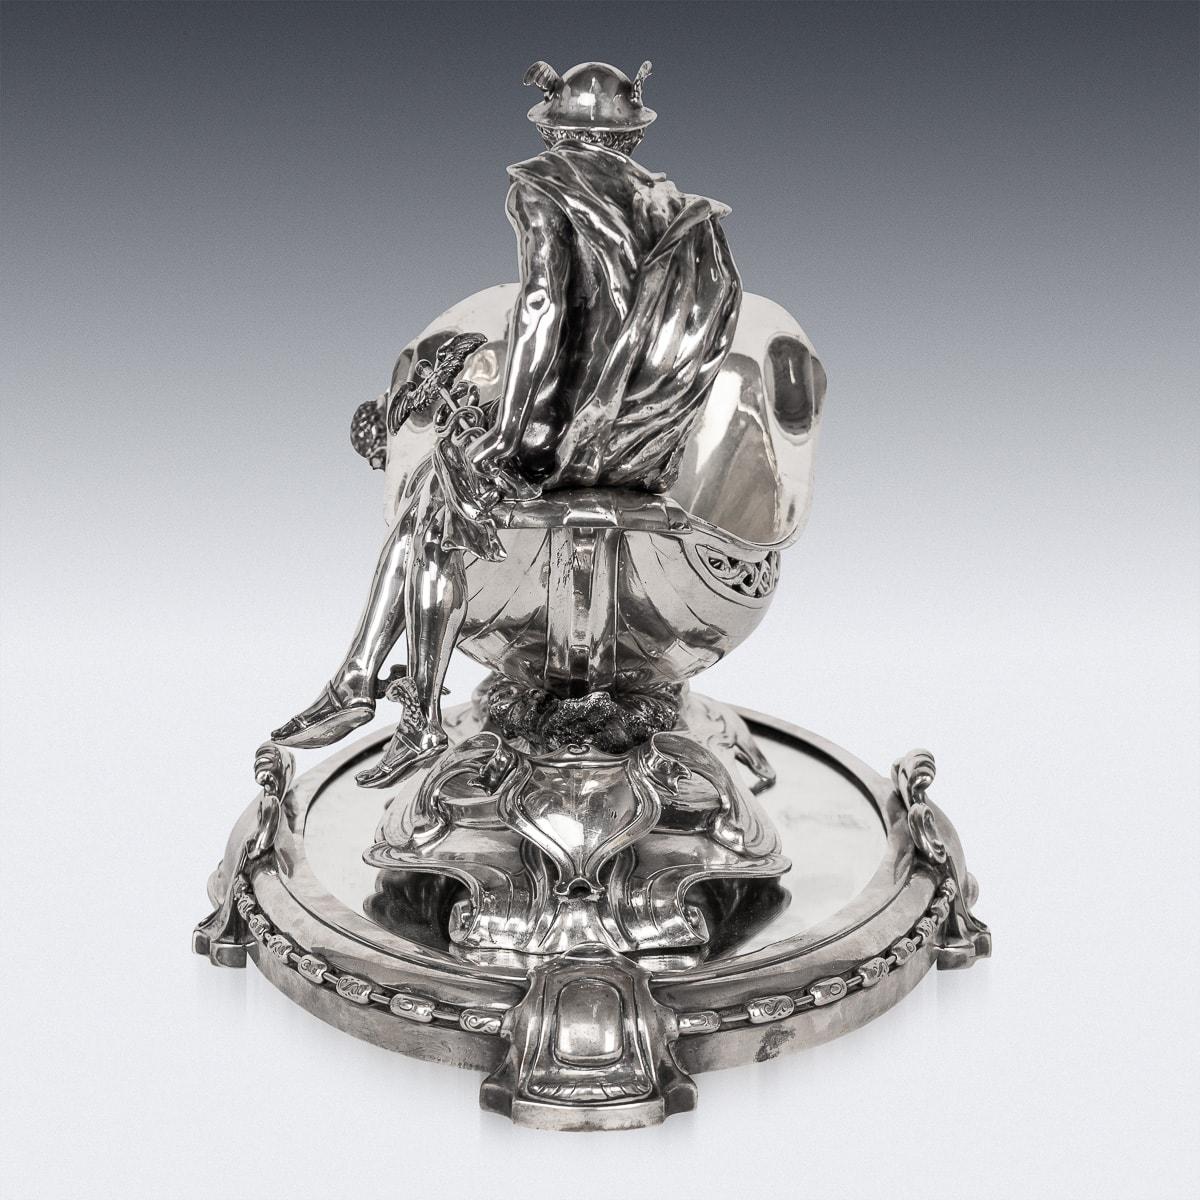 Antique 19th Century German large solid silver centrepiece, depicting the boat-form bowl raised on a scrolled base chased with waves, with a fully modelled figure of the god Mercury seated at the stern, the bow with the upper torso of a maiden